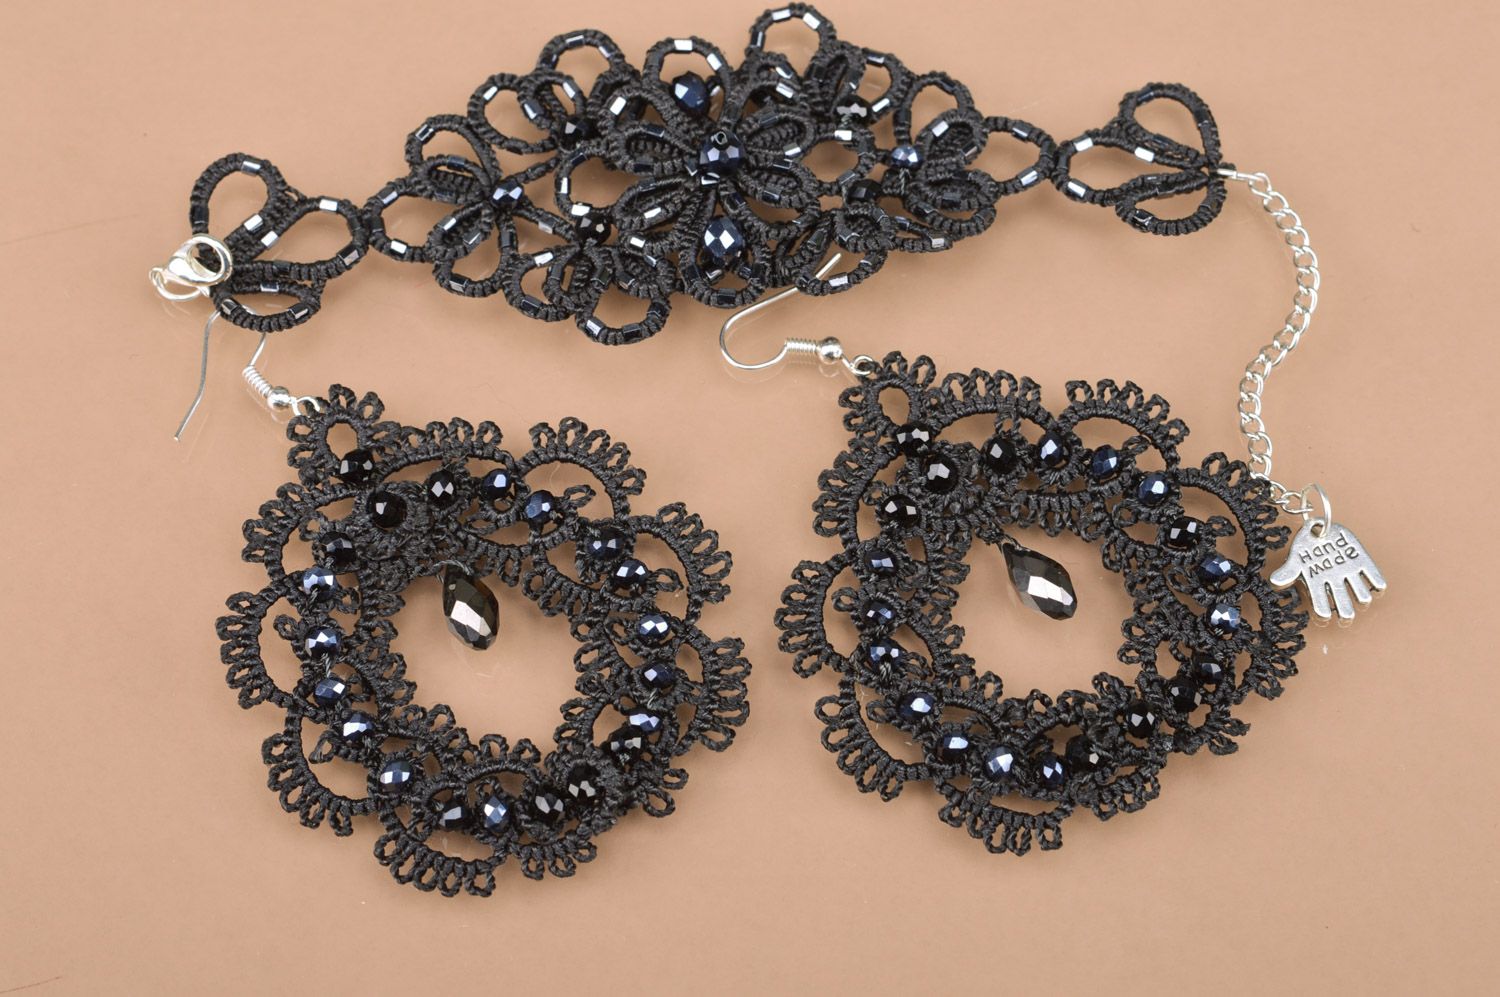 Handmade ankers tatting woven jewelry set two items bracelet and earrings in black color photo 2